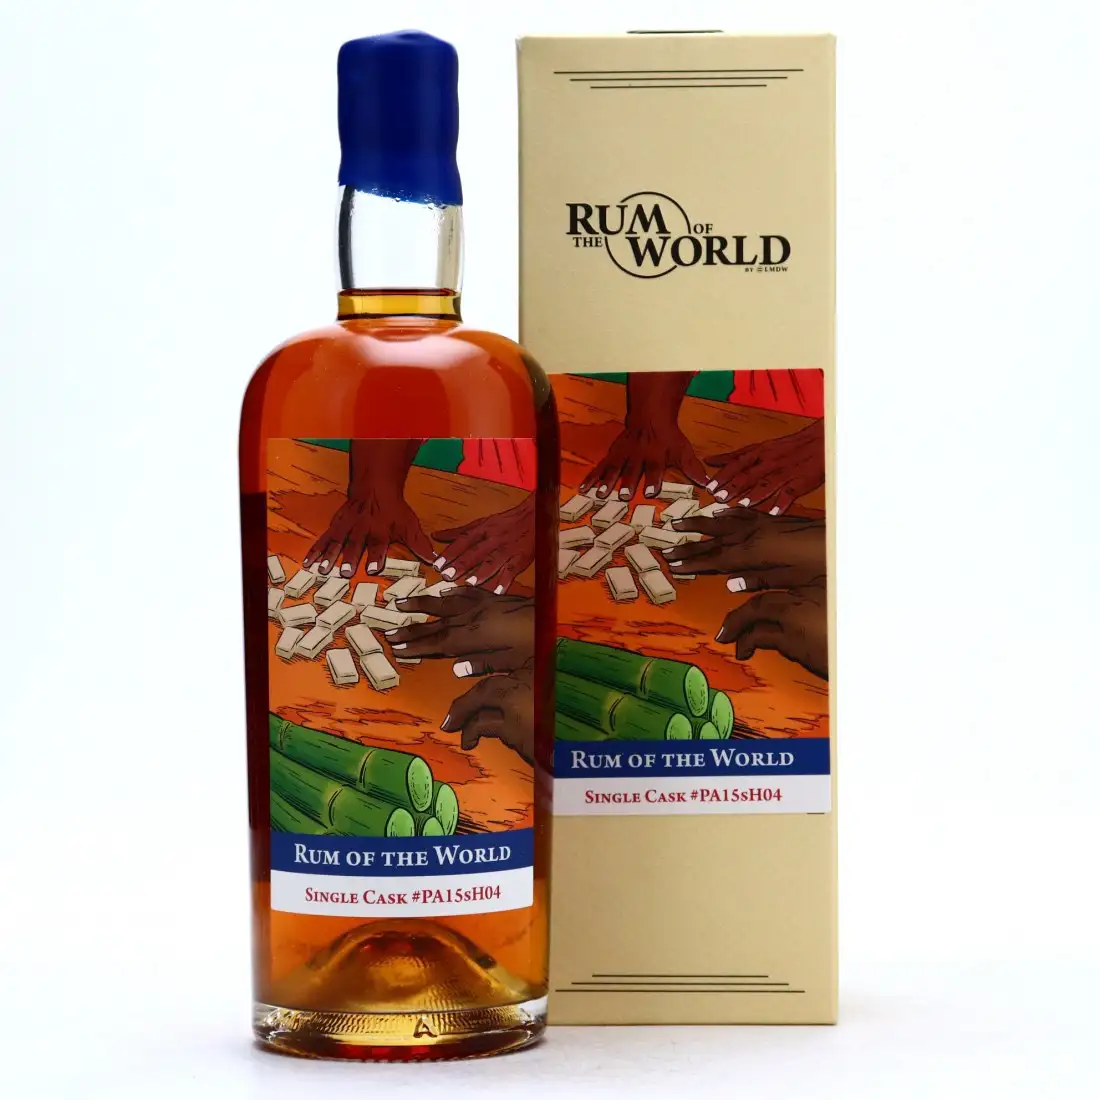 Image of the front of the bottle of the rum Rum of the World